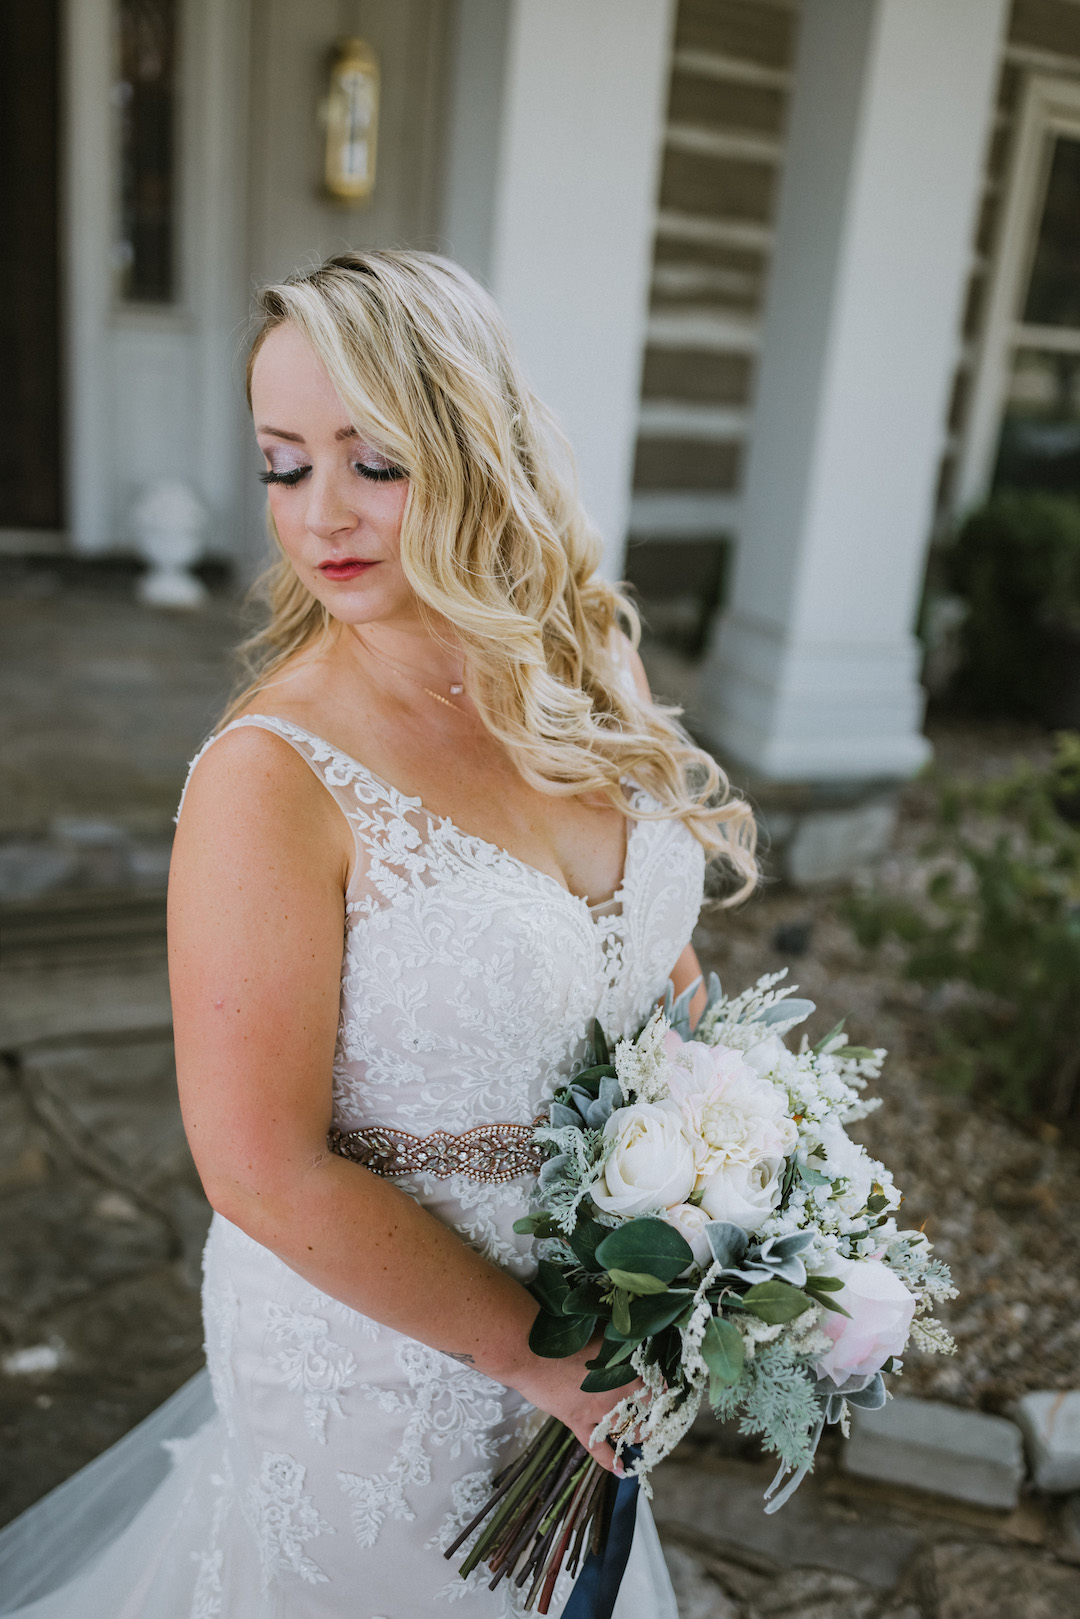 Tennessee Wedding Photographer Gambill Photography